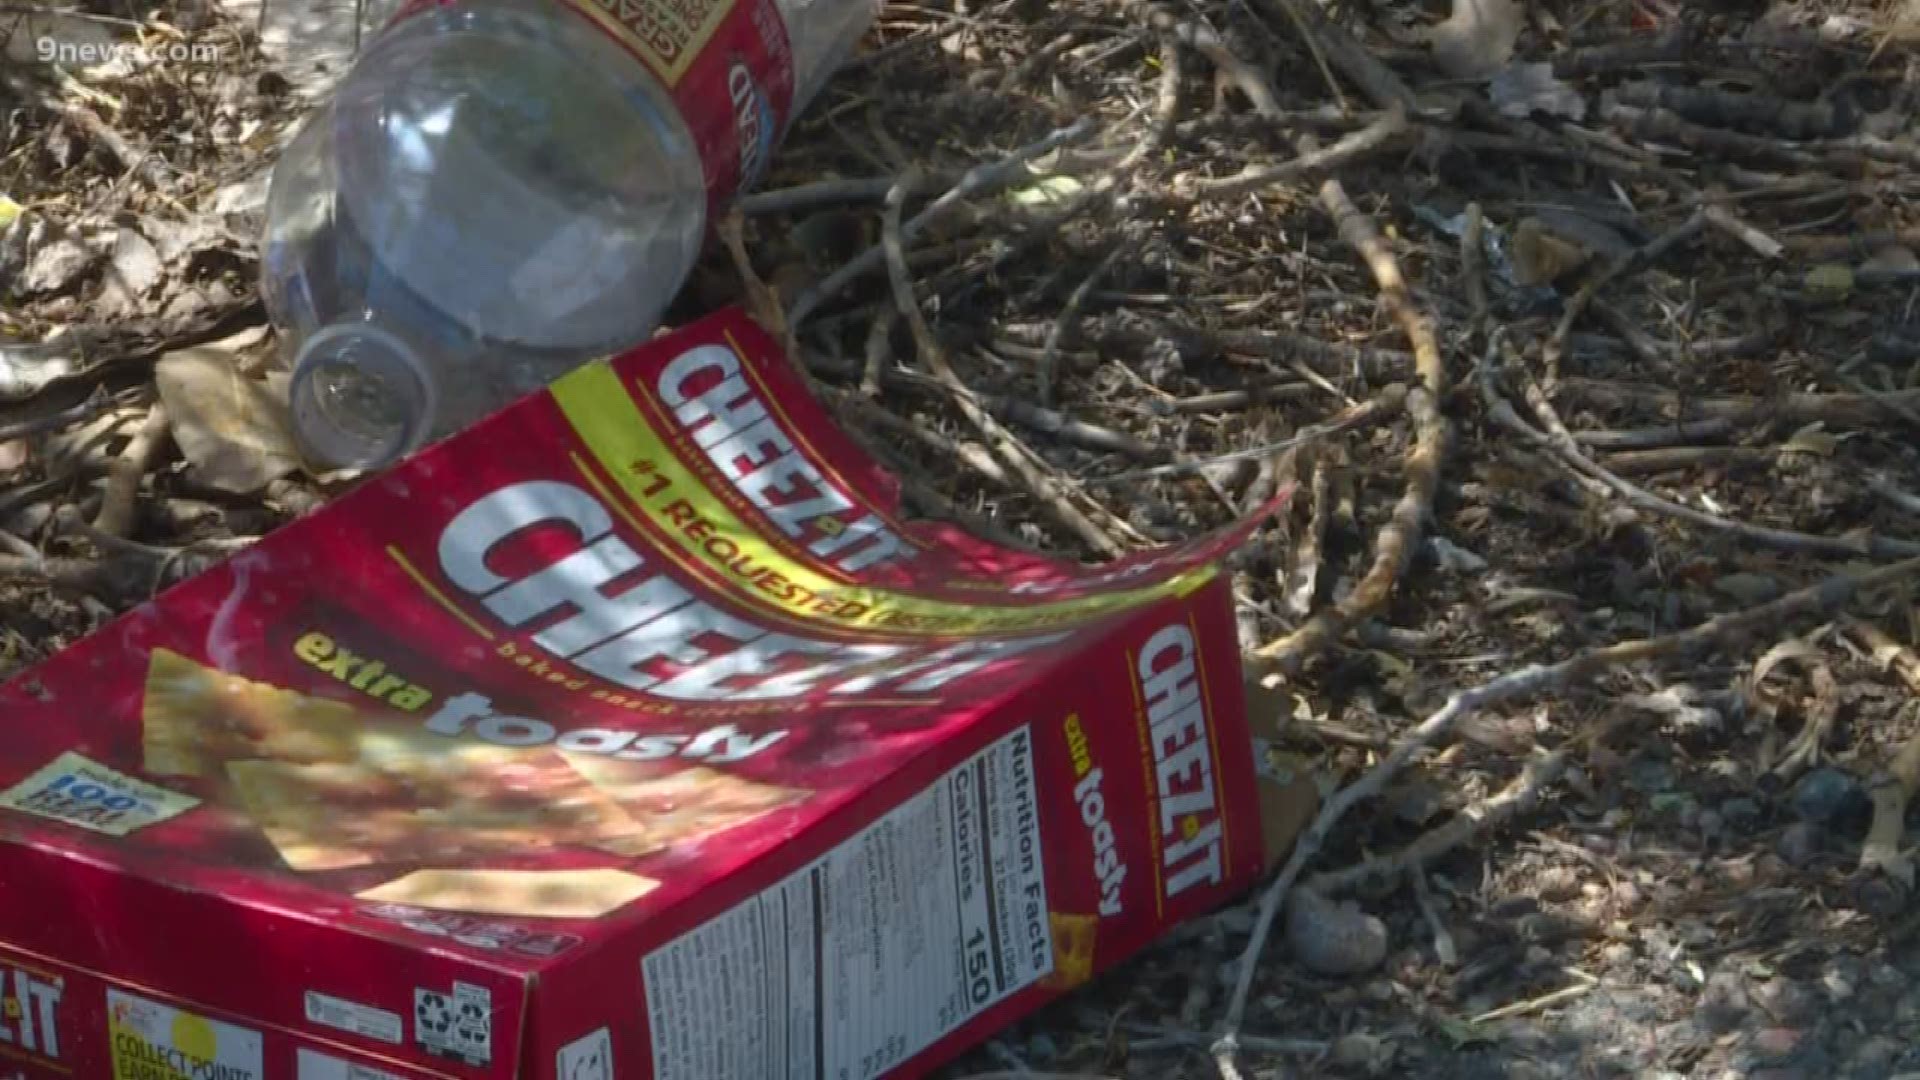 The message is simple: throw away trash in a trash can and try to generate less trash when you go to a park or a hiking trail. Unfortunately, Jefferson County Open Space officials say the trash increases on holiday weekends.